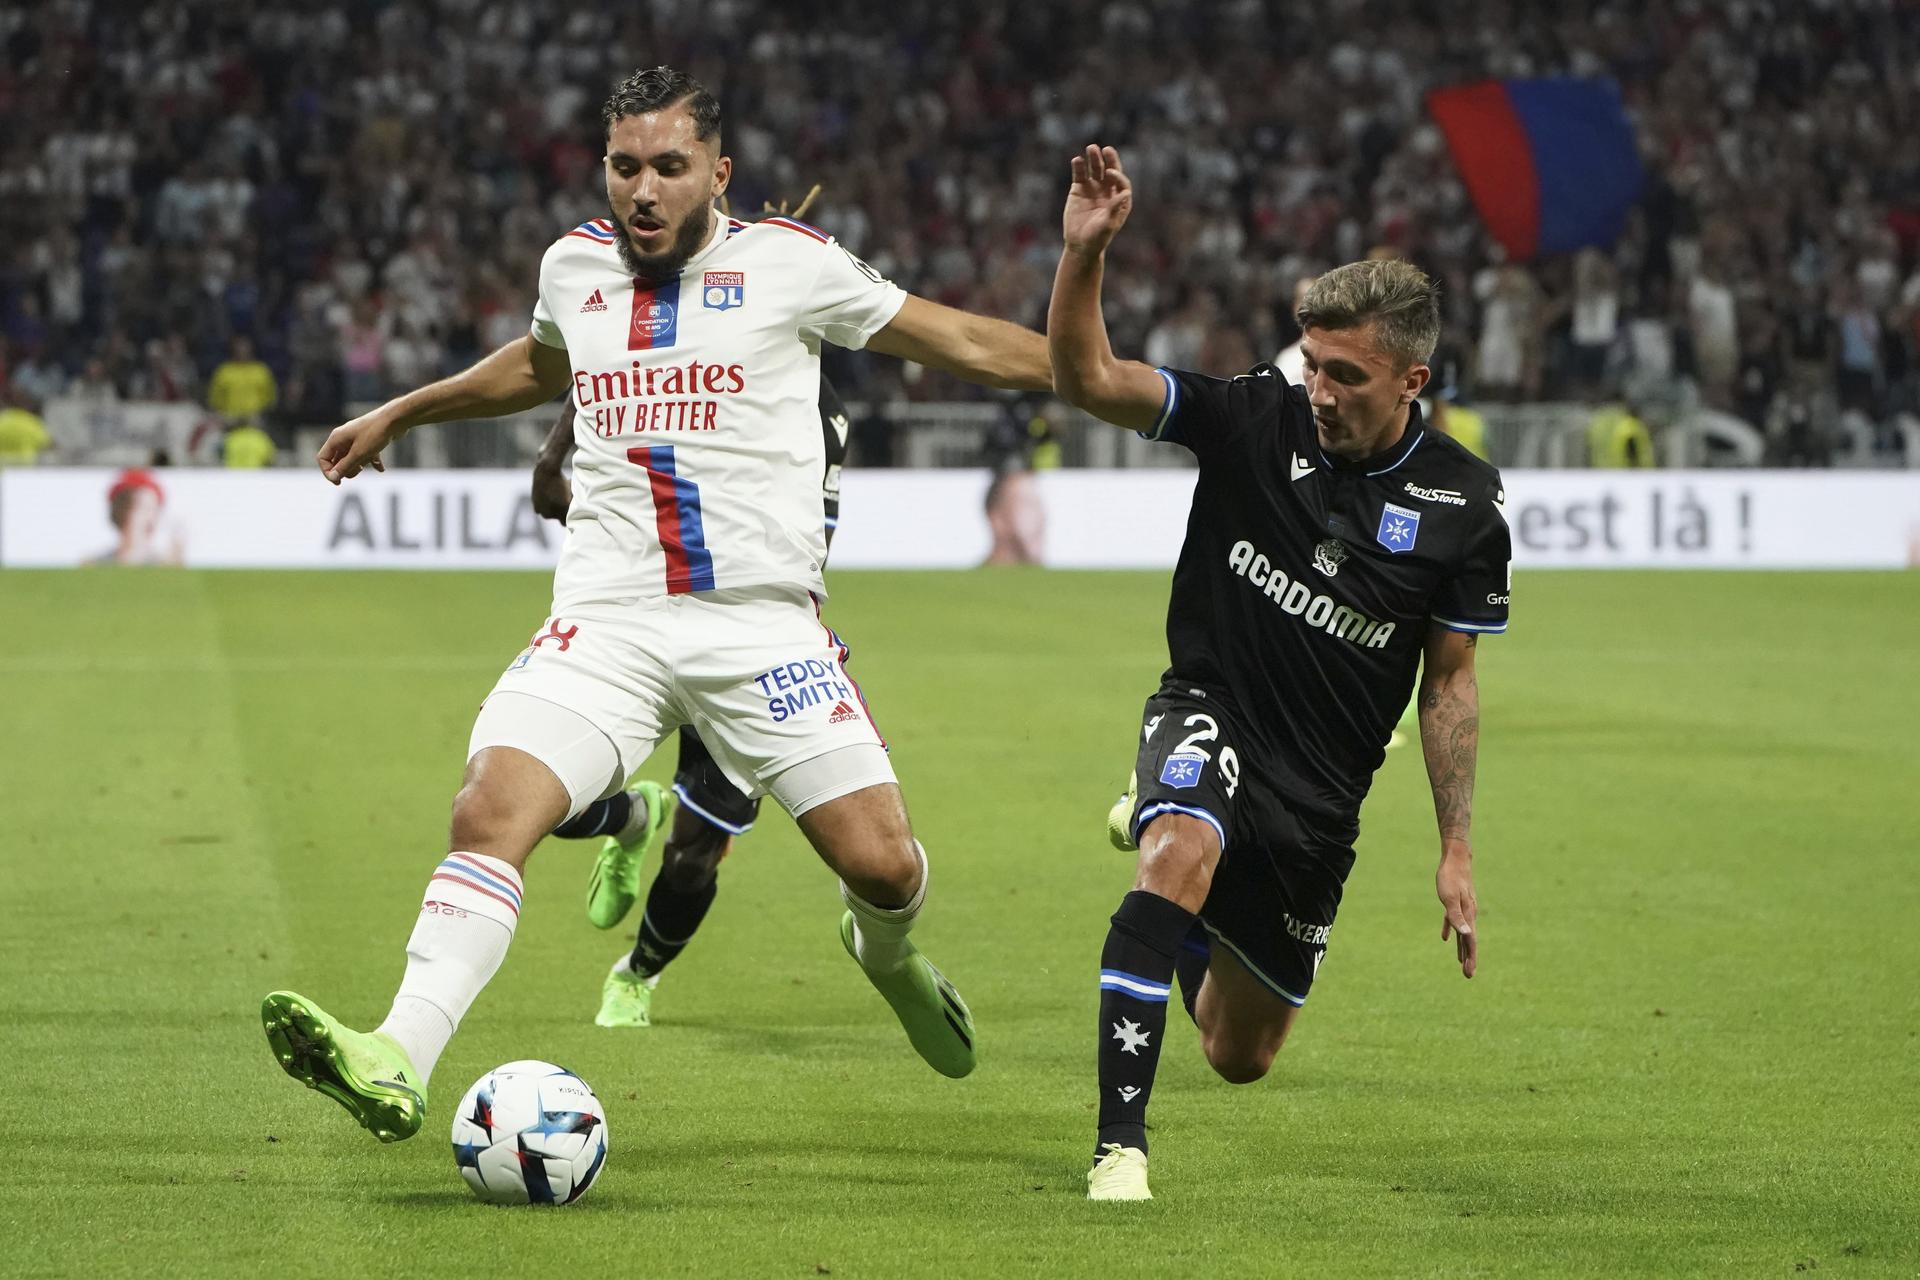 Brest vs. Auxerre Predictions, Picks and Betting Odds - Sunday, October 2, 2022